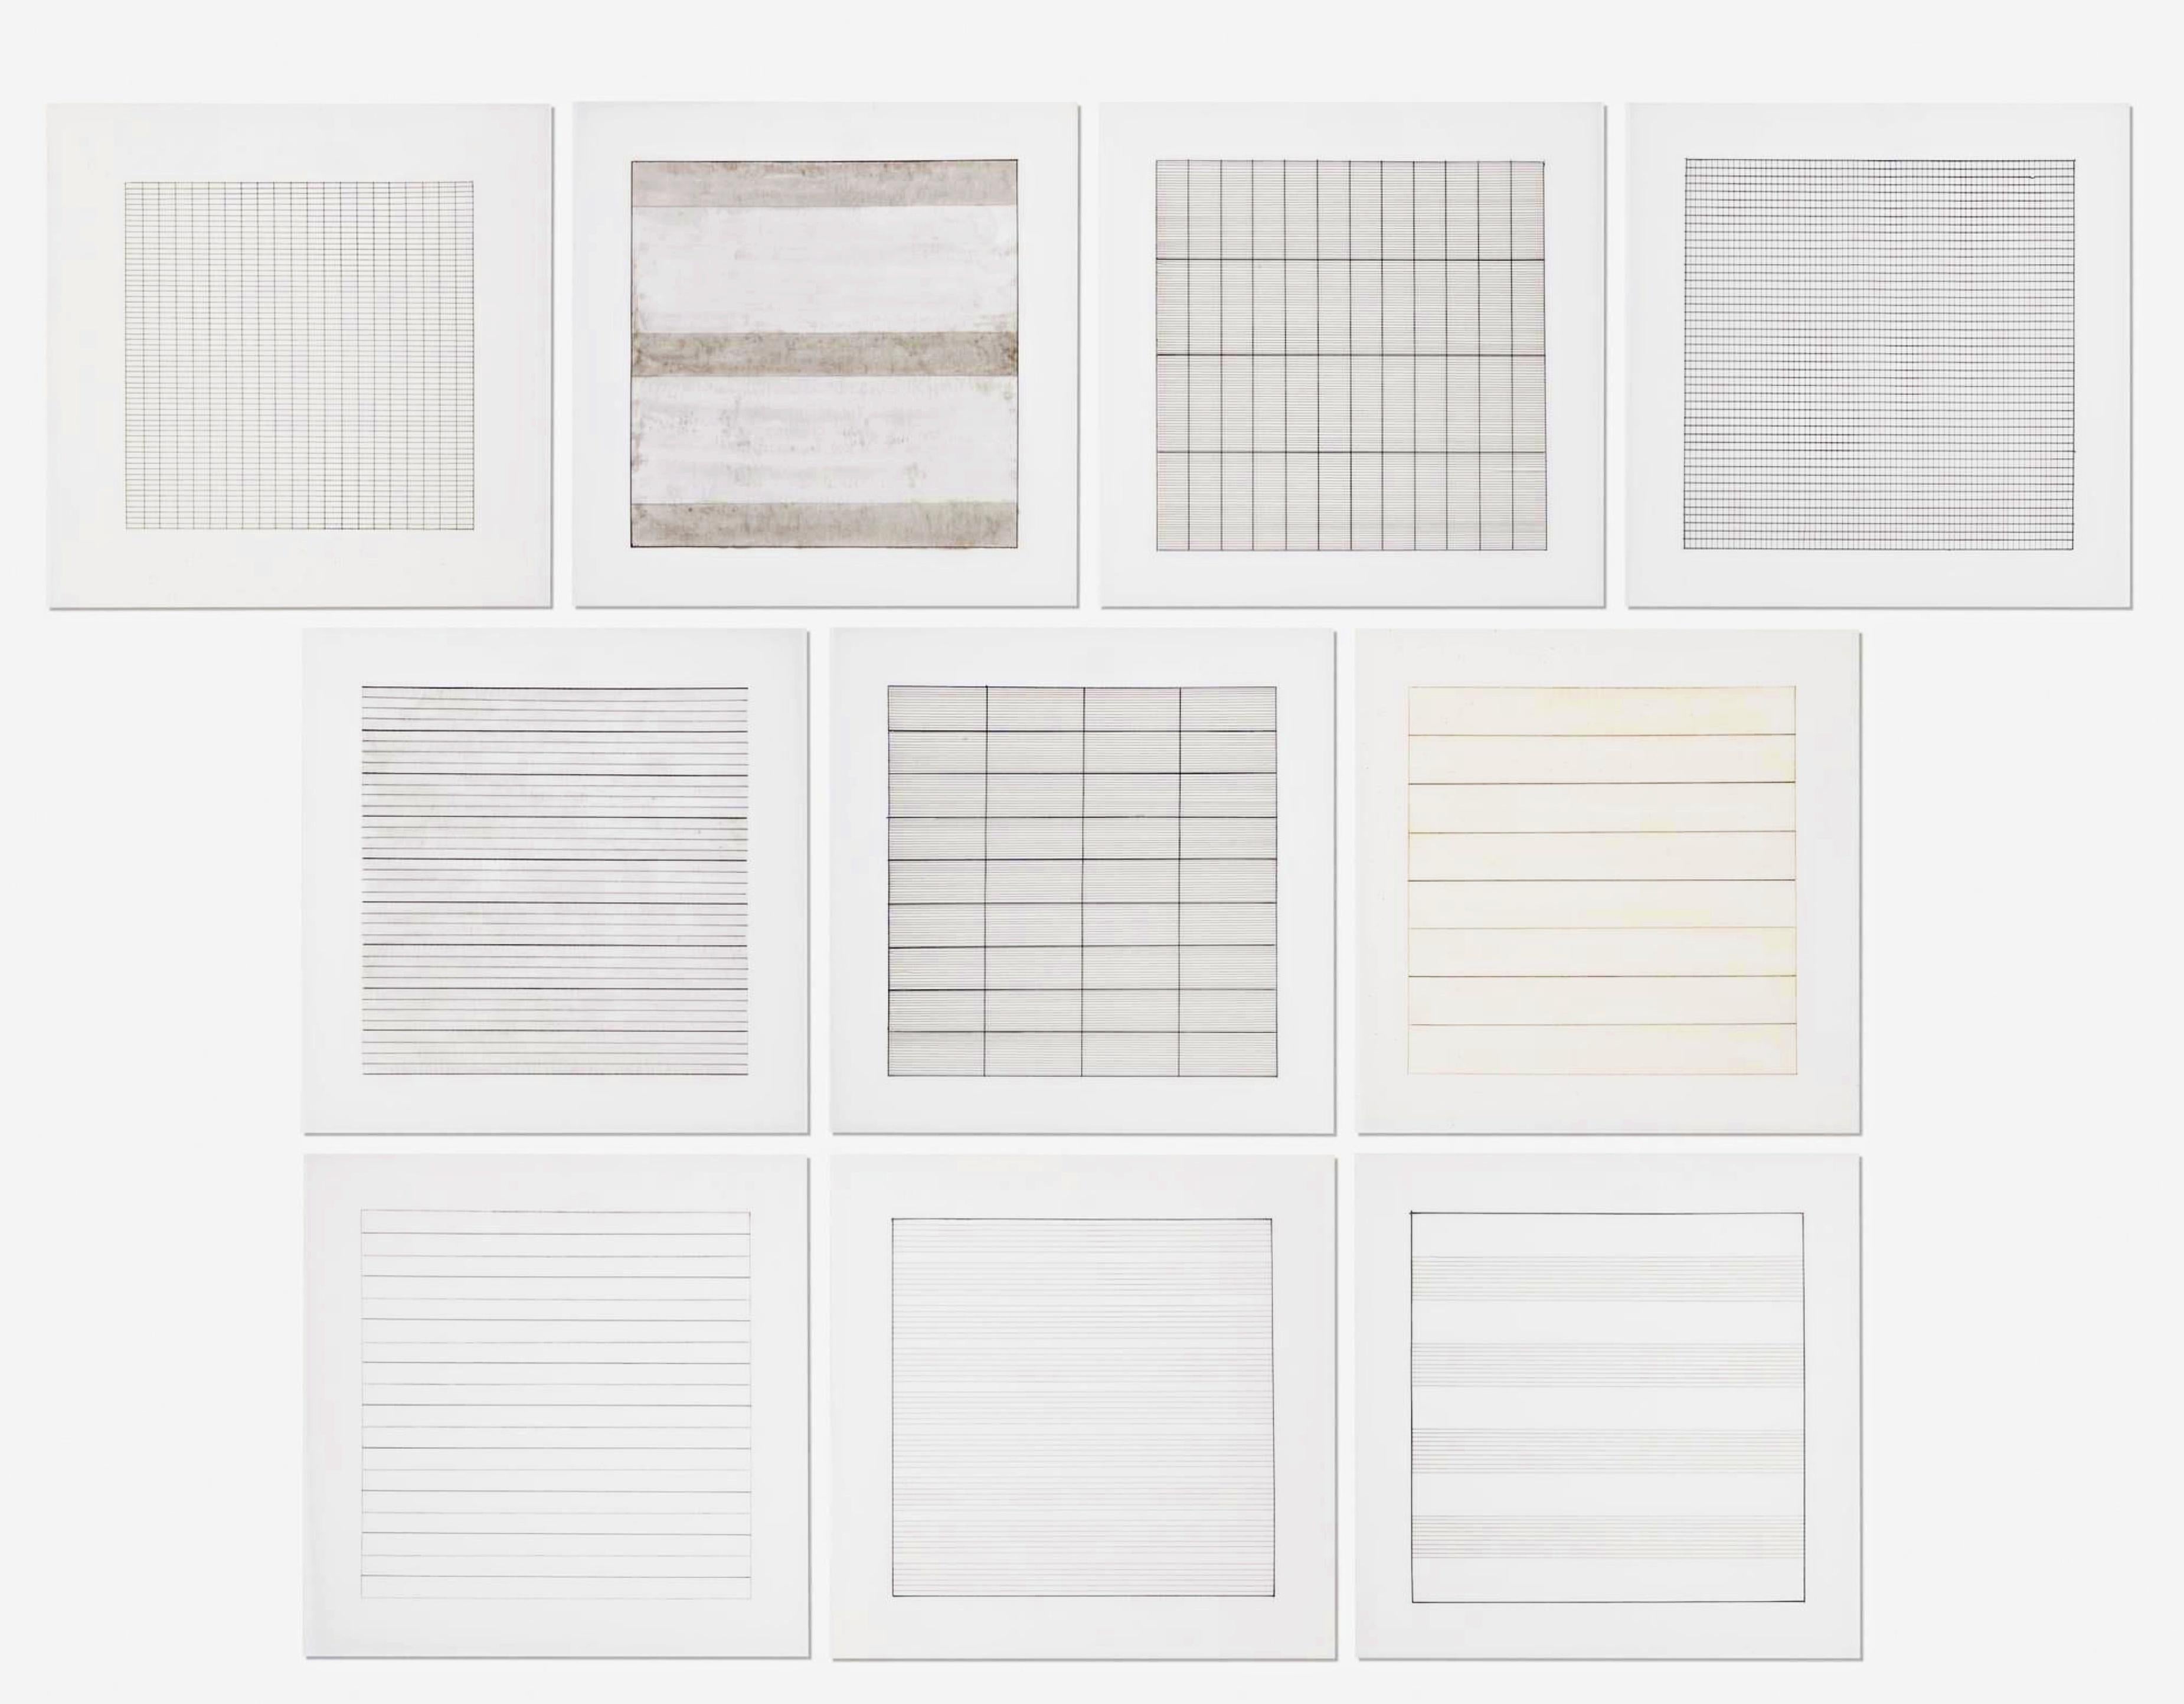 Paintings and Drawings: Suite of 10 Separate (Individual) lithographs on vellum  - Minimalist Mixed Media Art by Agnes Martin